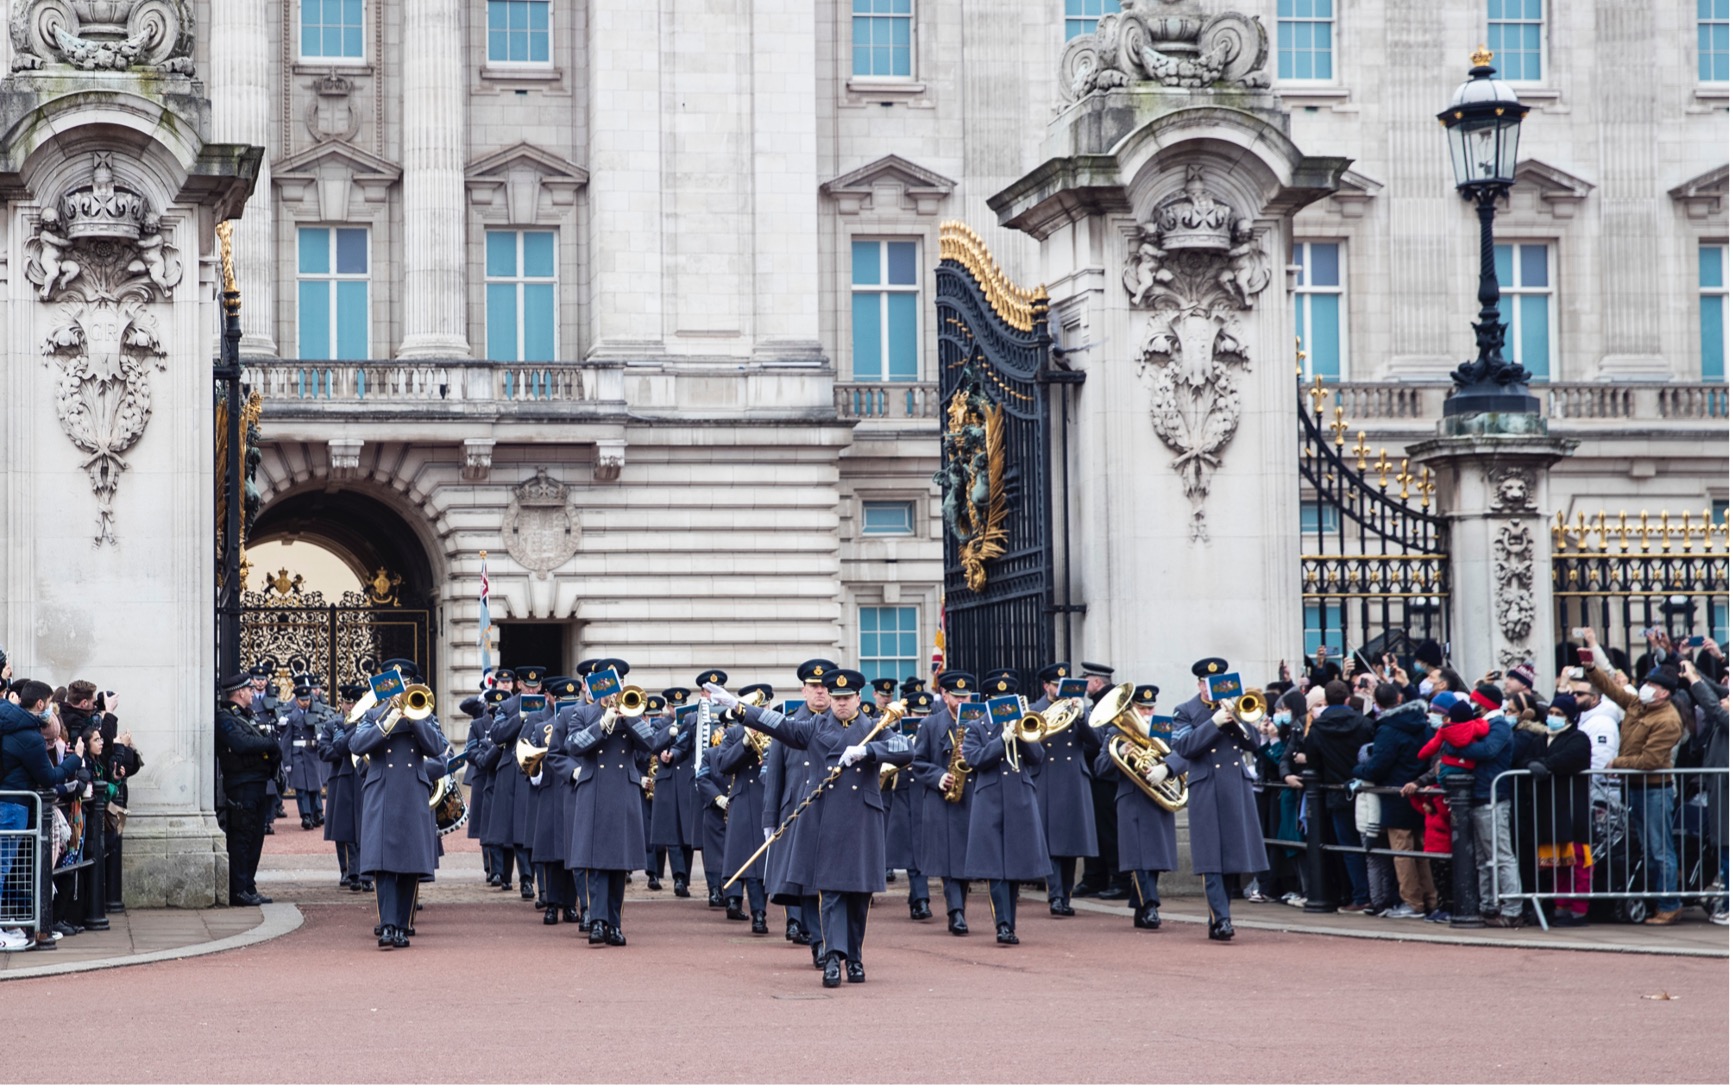 The Band of the RAF Regiment parading through gates of Buckingham Palace with public in the crowd